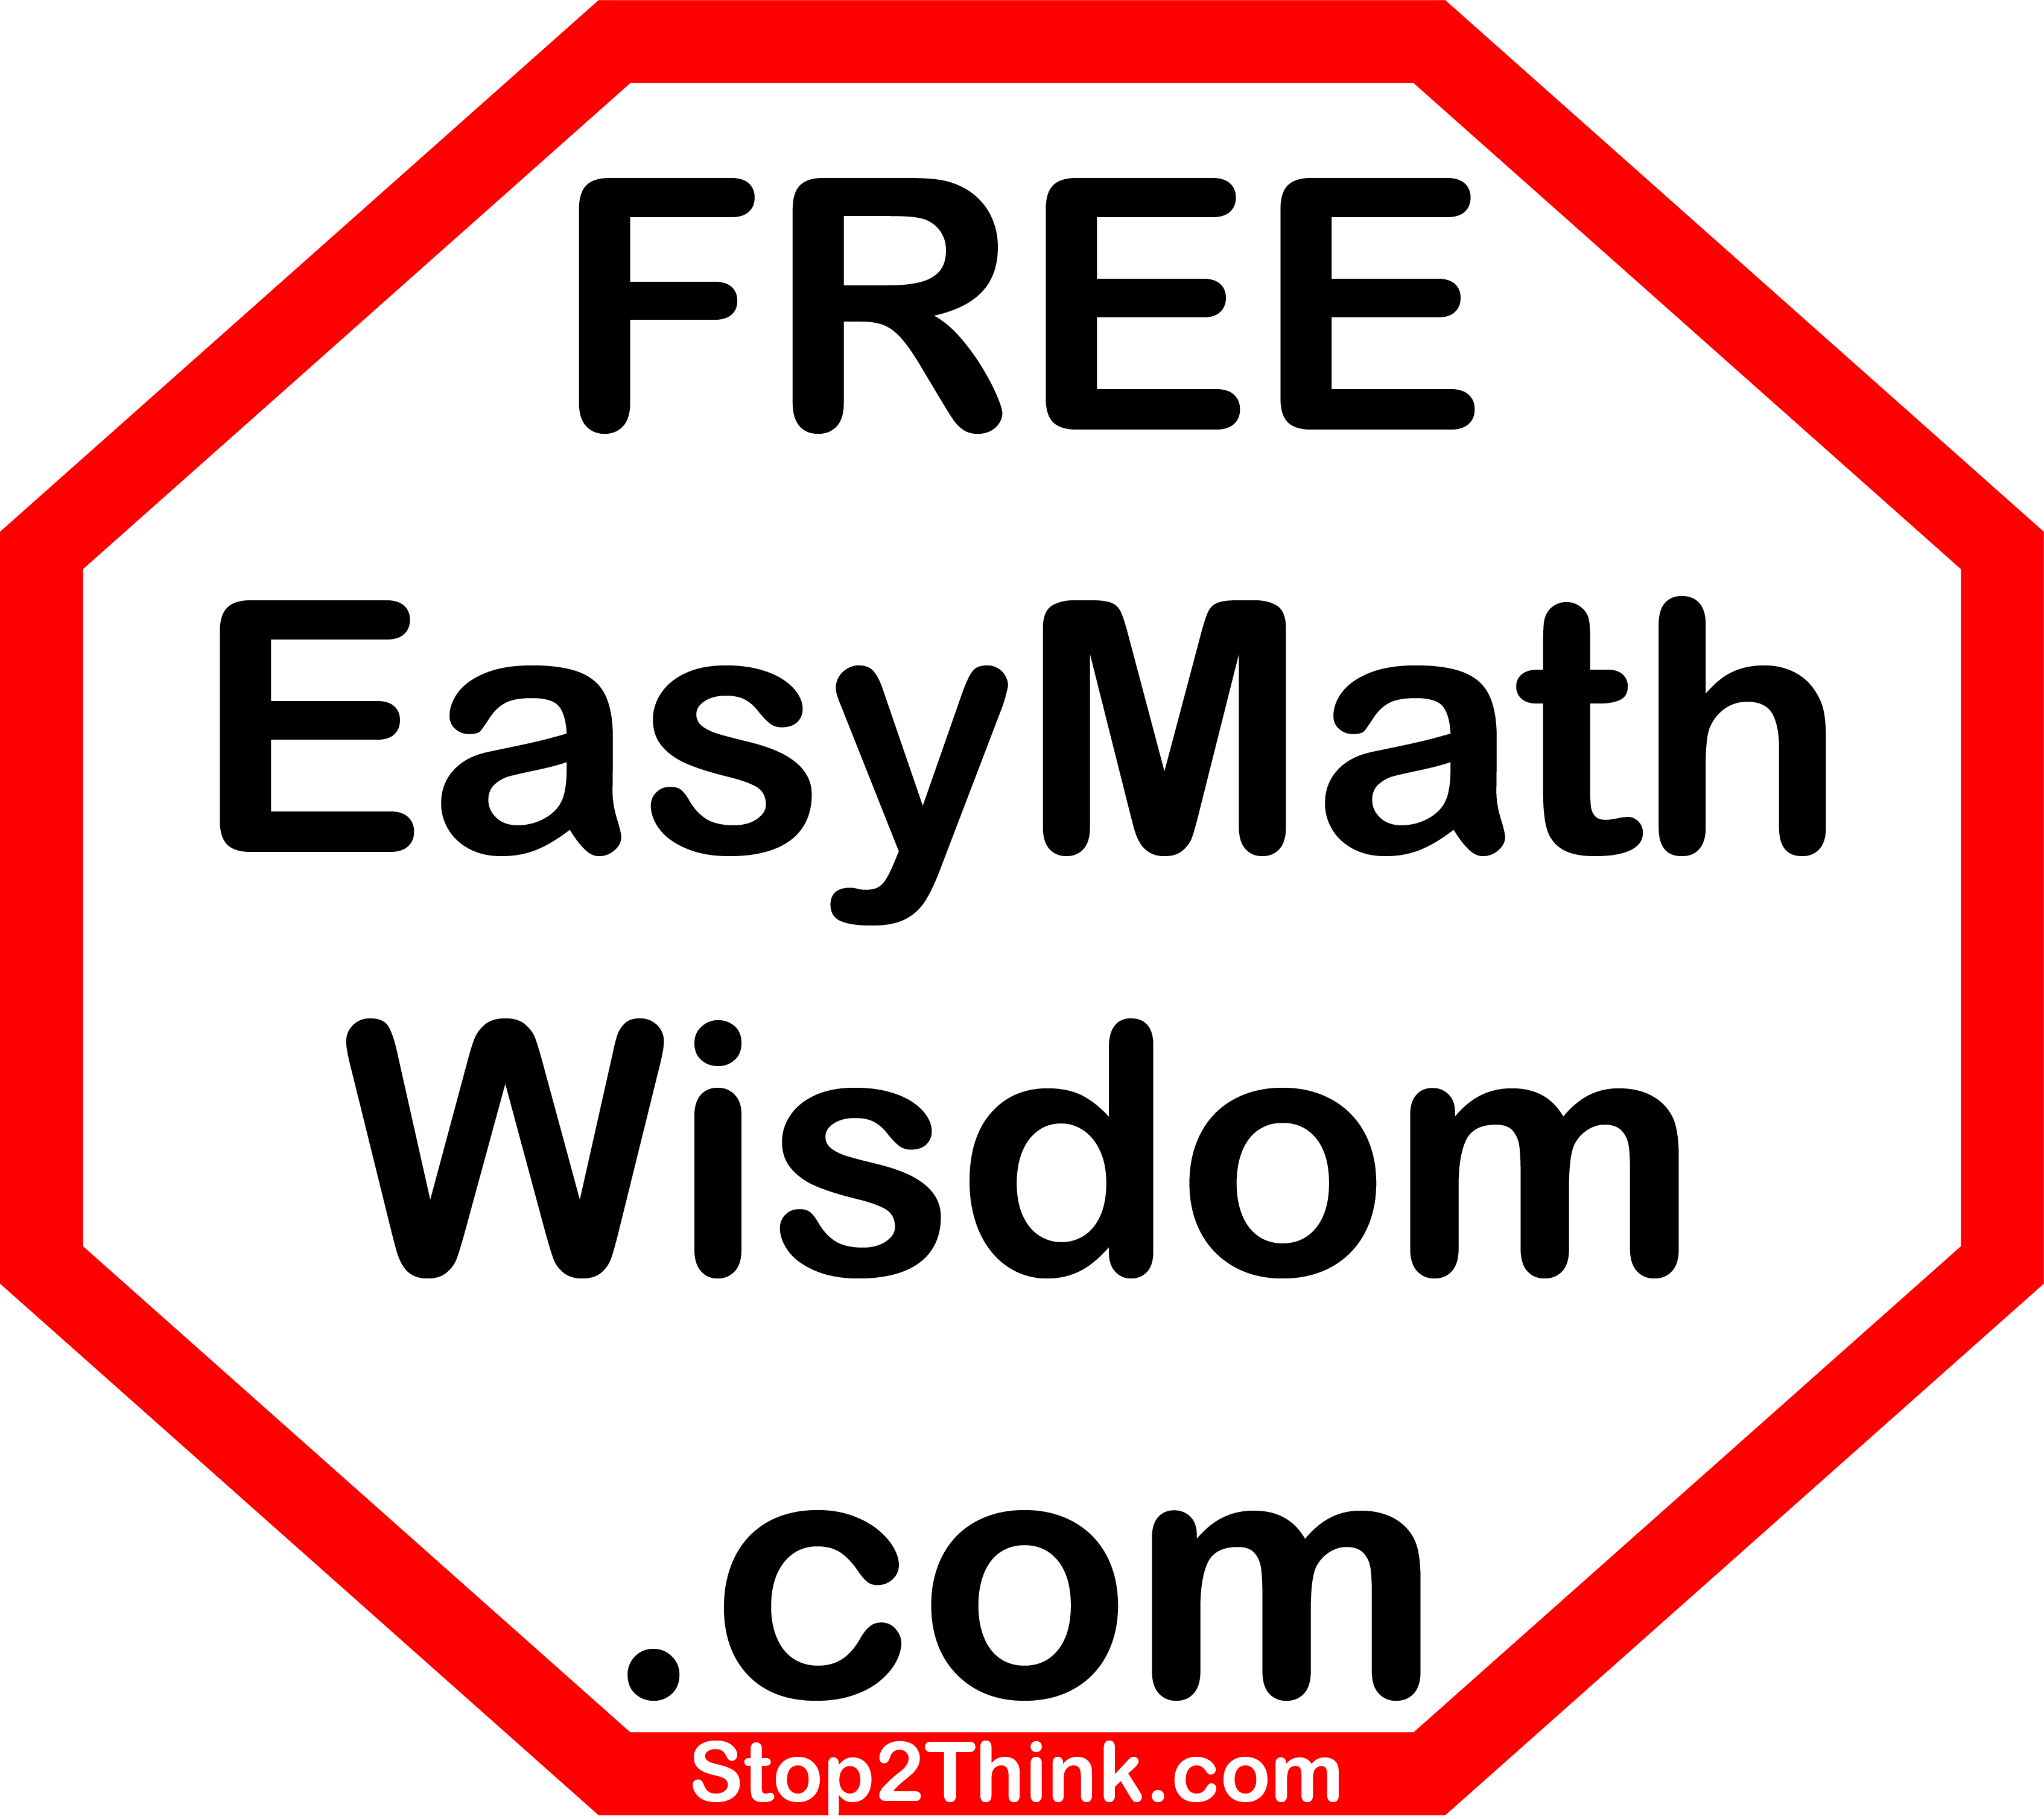 Free Easy Math Wisdom Builds Math and Social Self Confidence…